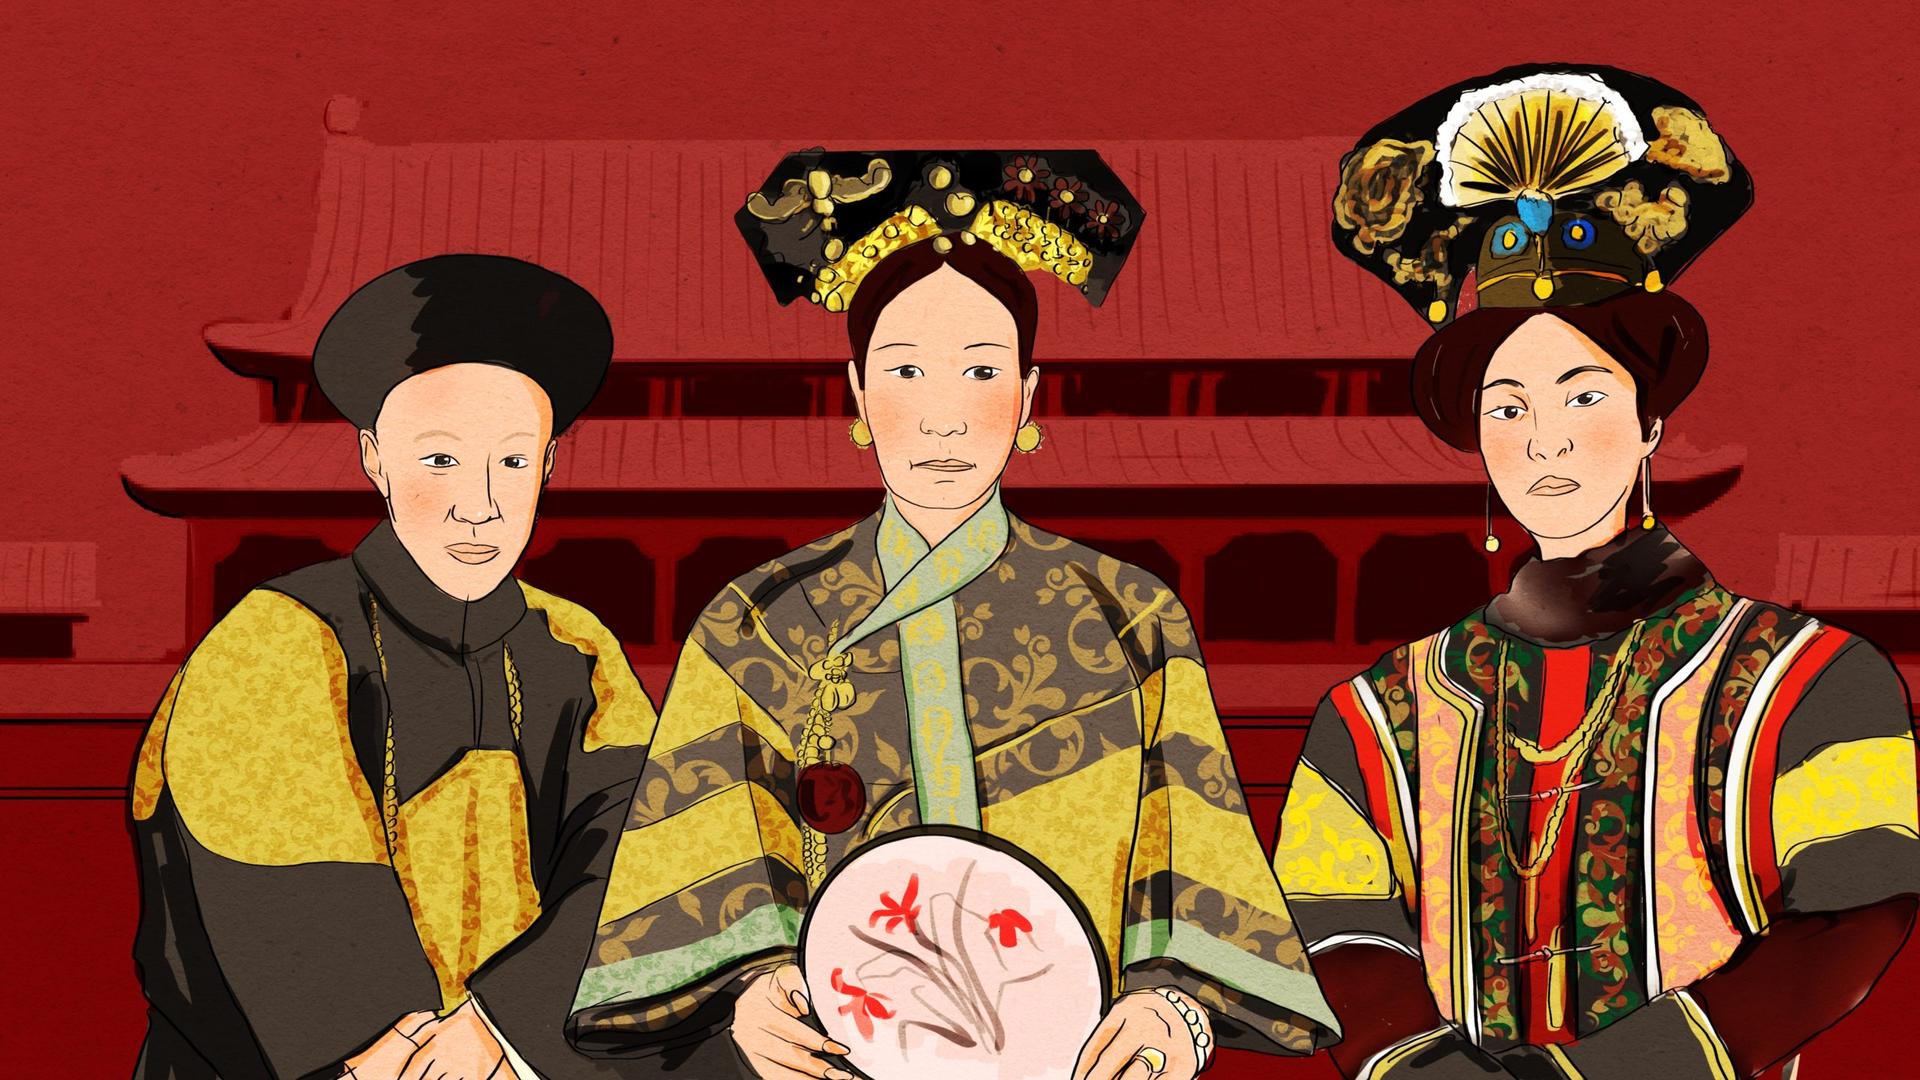 An illustration by Alex Santafe depicting Empress Dowager Cixi, Prince Gong and Empress Dowager Ci'an